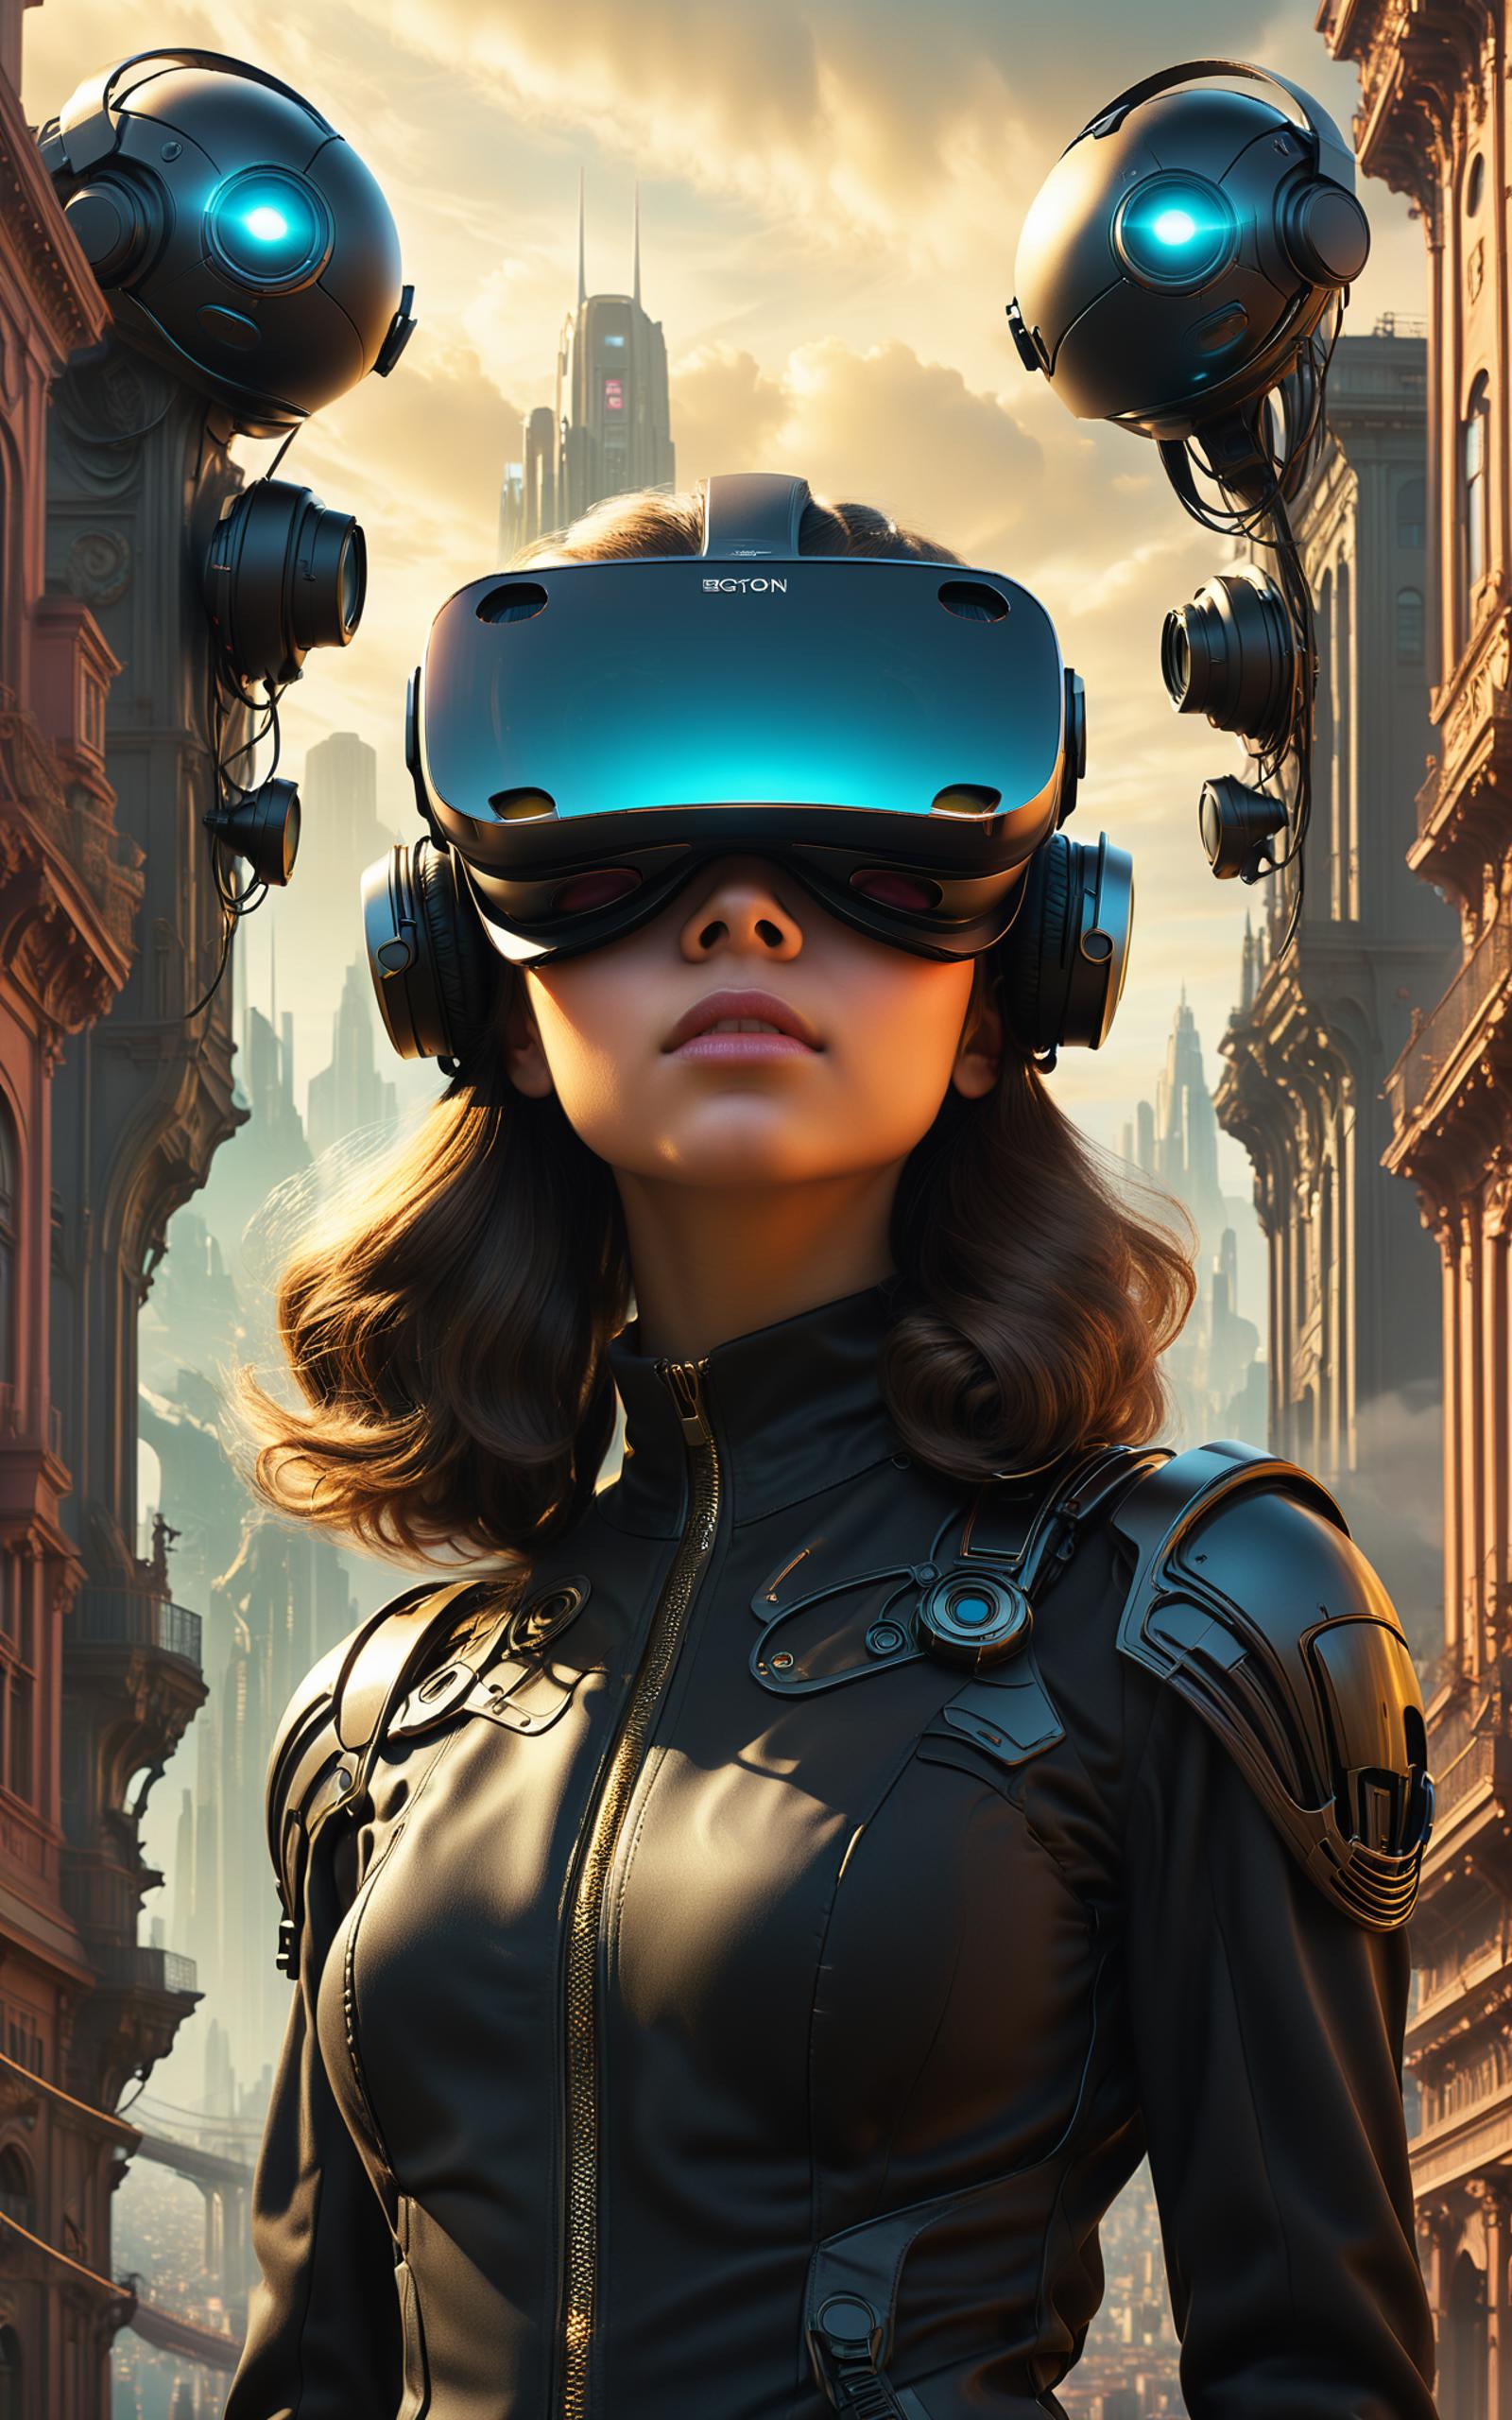 A woman wearing a black jacket and headphones, with a VR headset on.